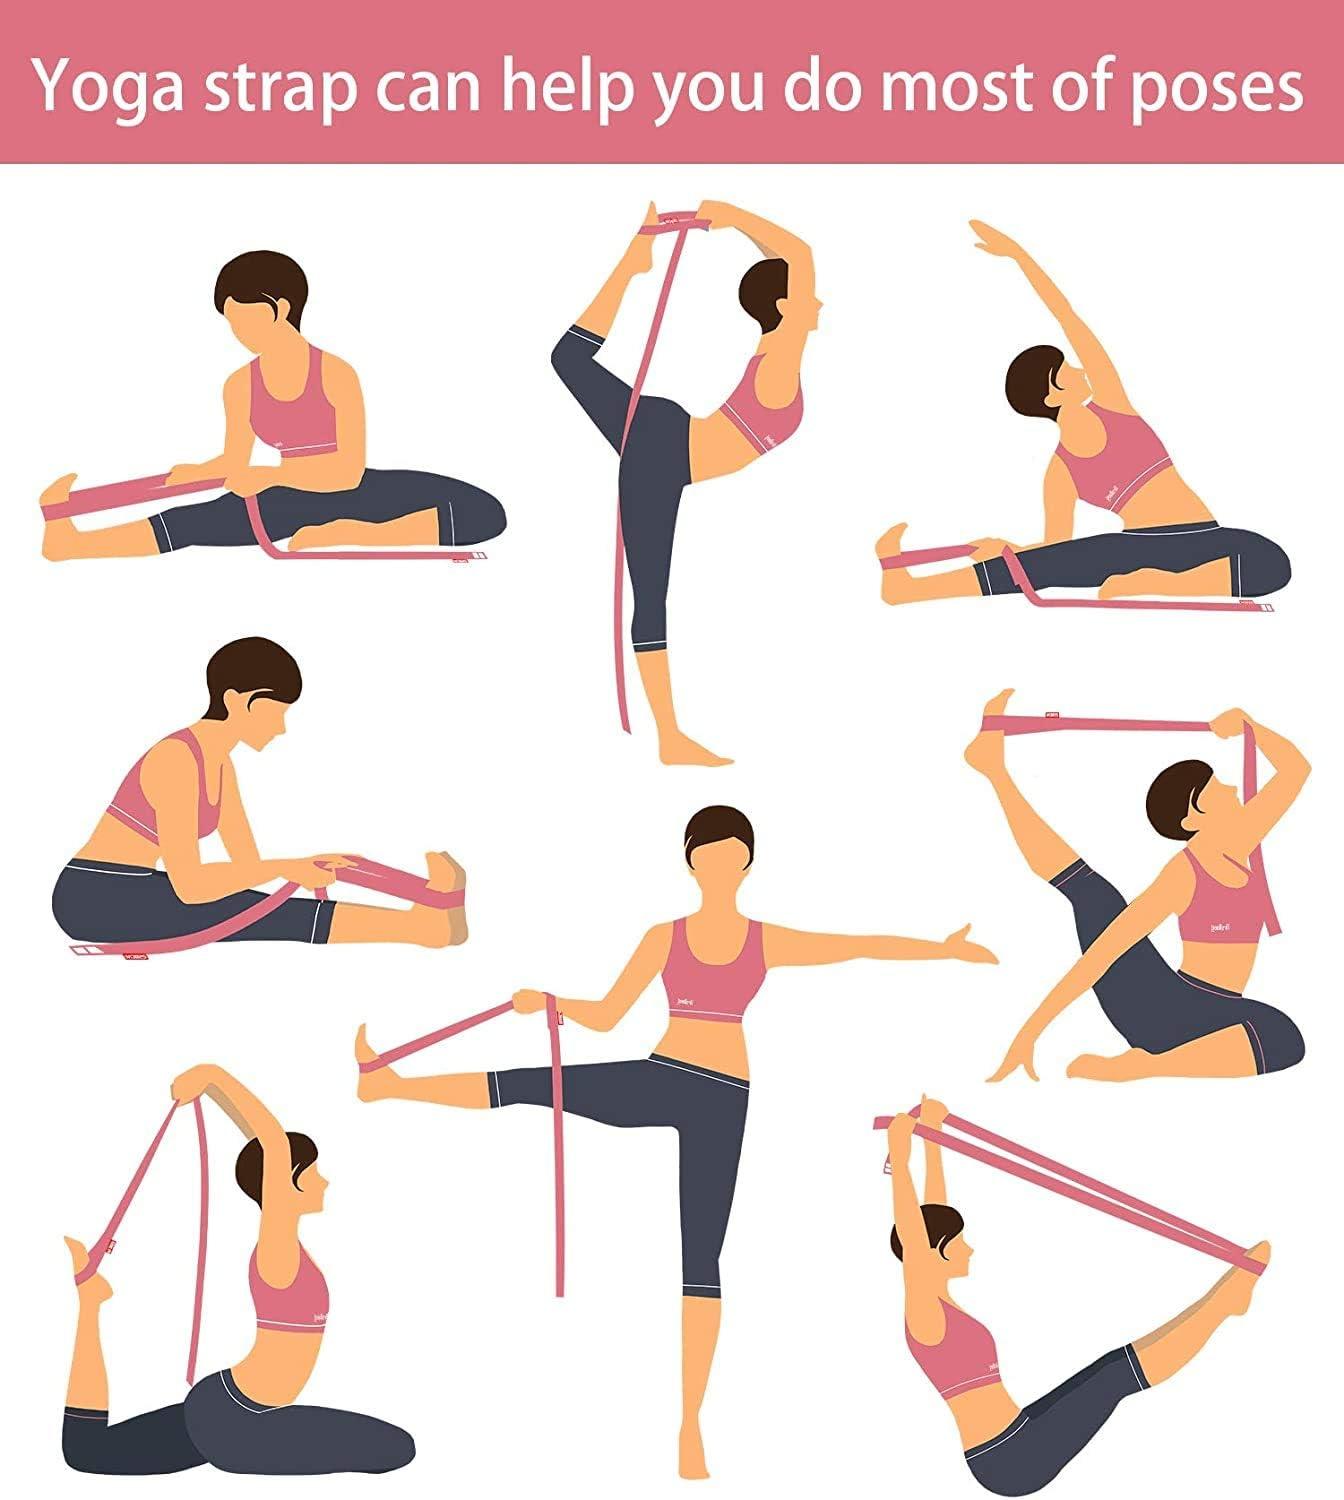 How to Use a Yoga Strap in 6 Common Yoga Poses